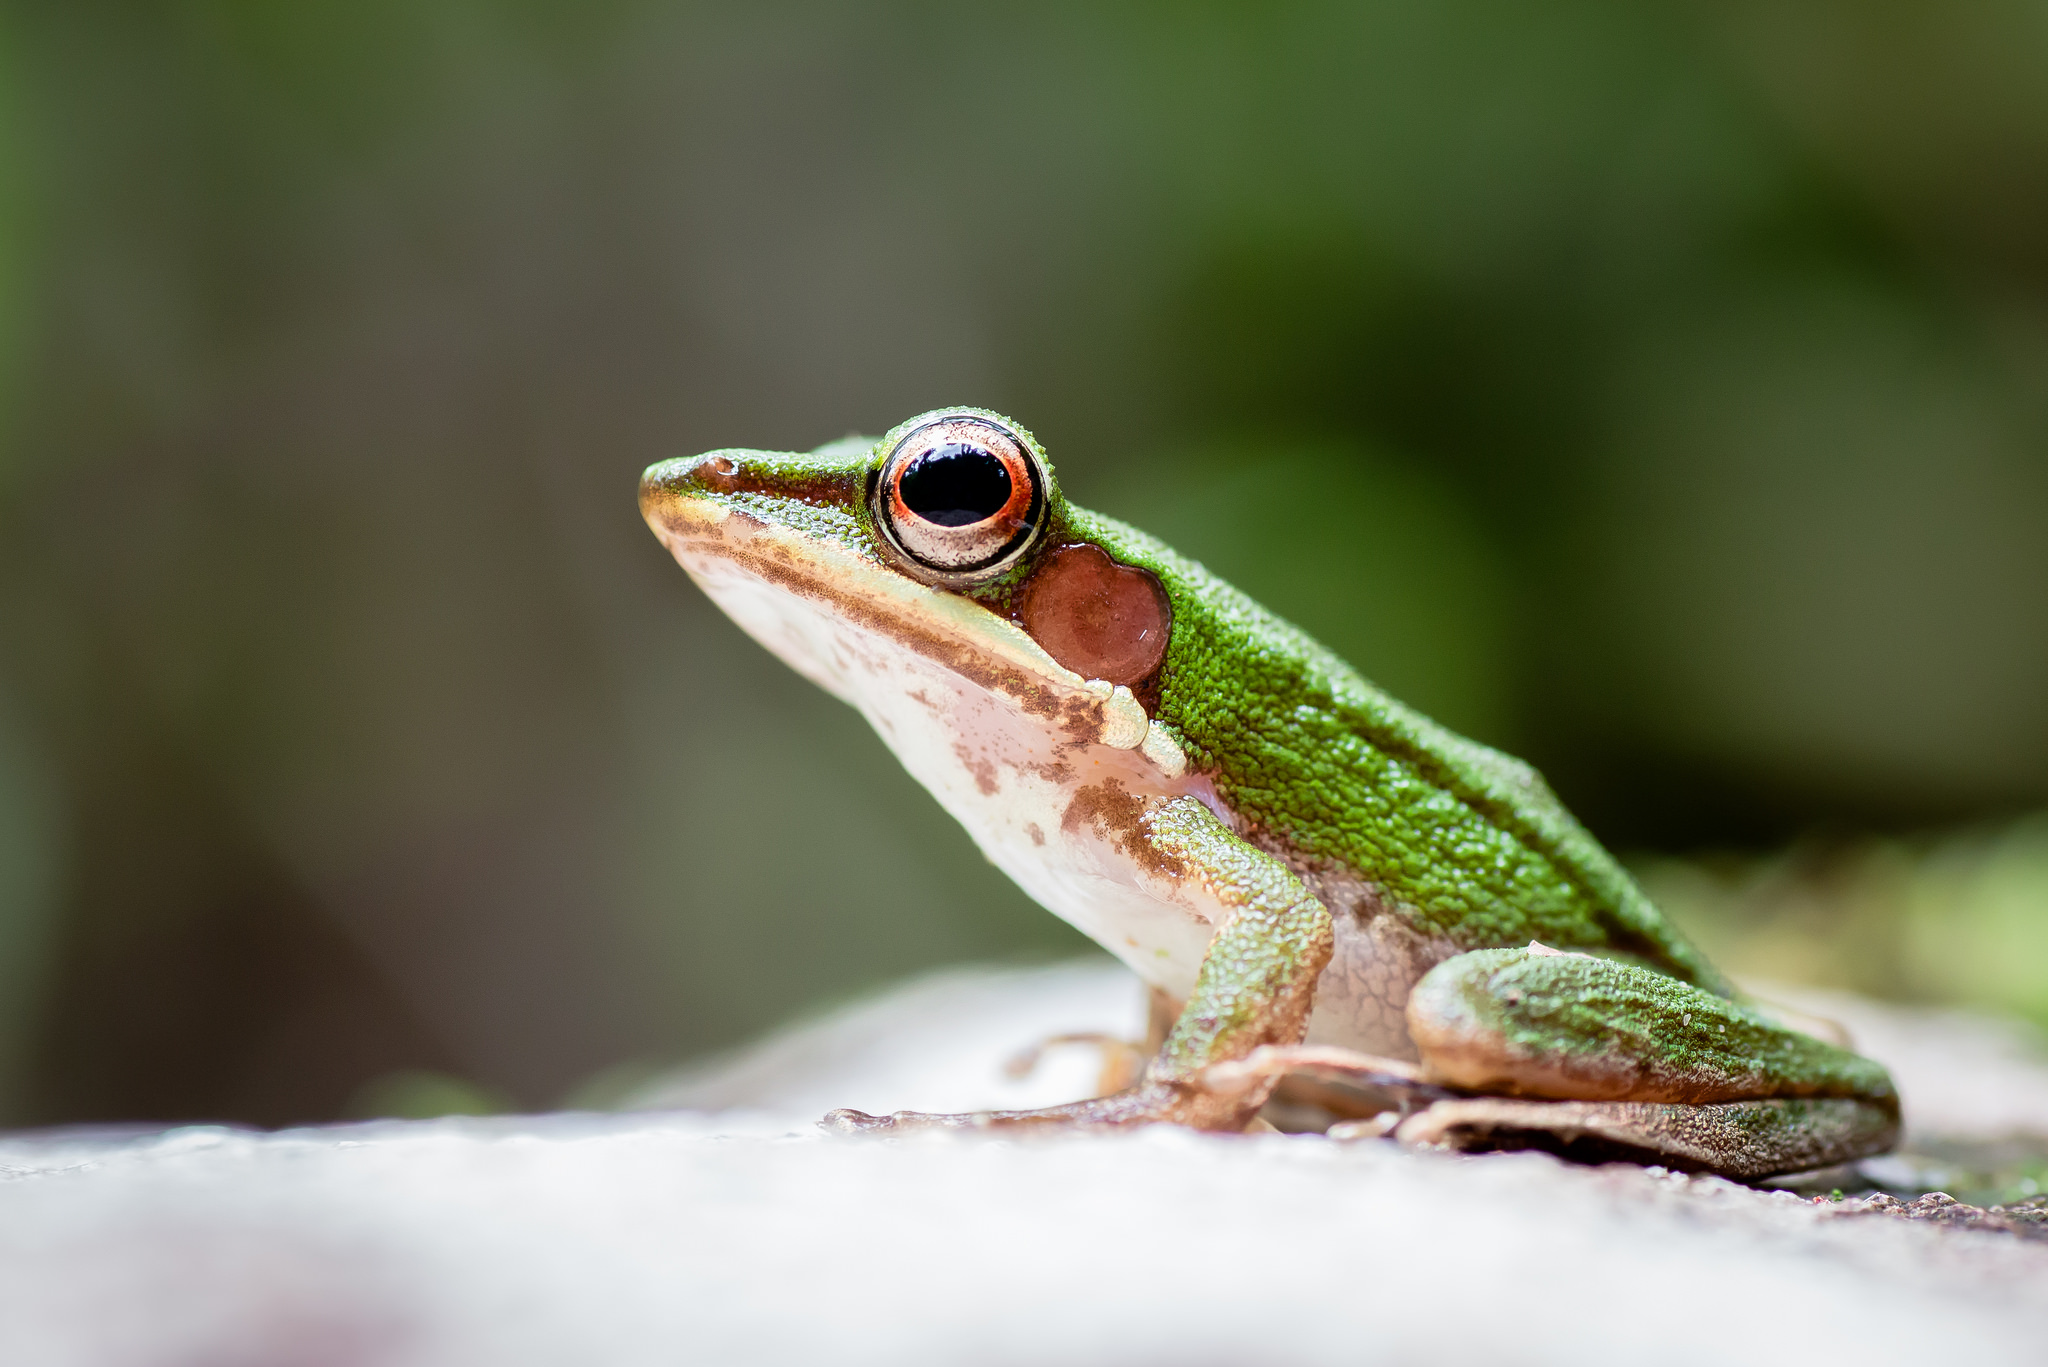 When did amphibians first appear on Earth?